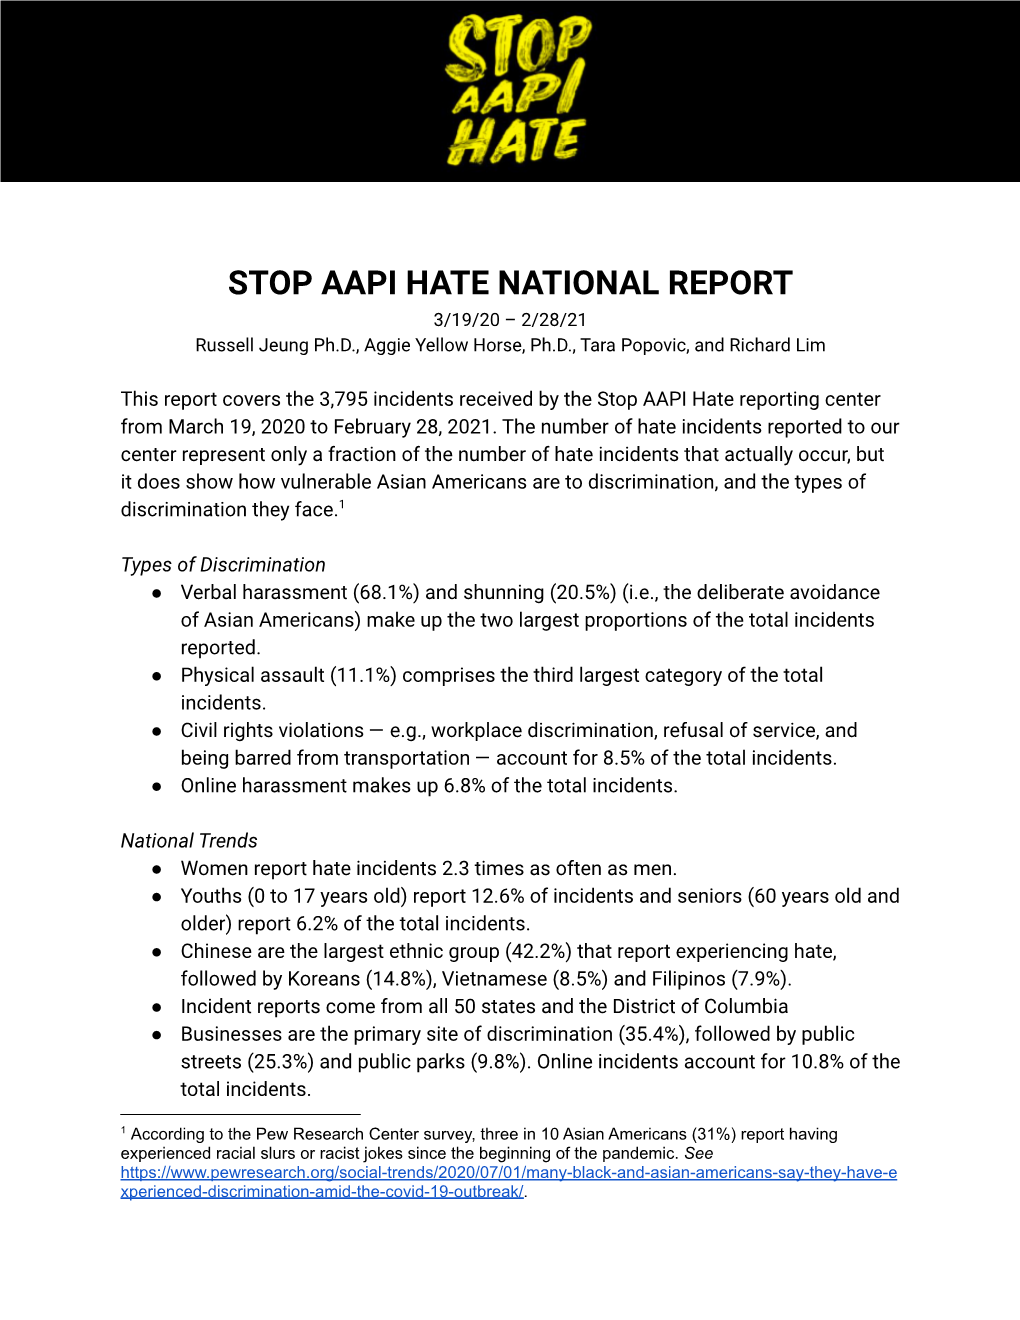 210316 Stop AAPI Hate National Report.Docx